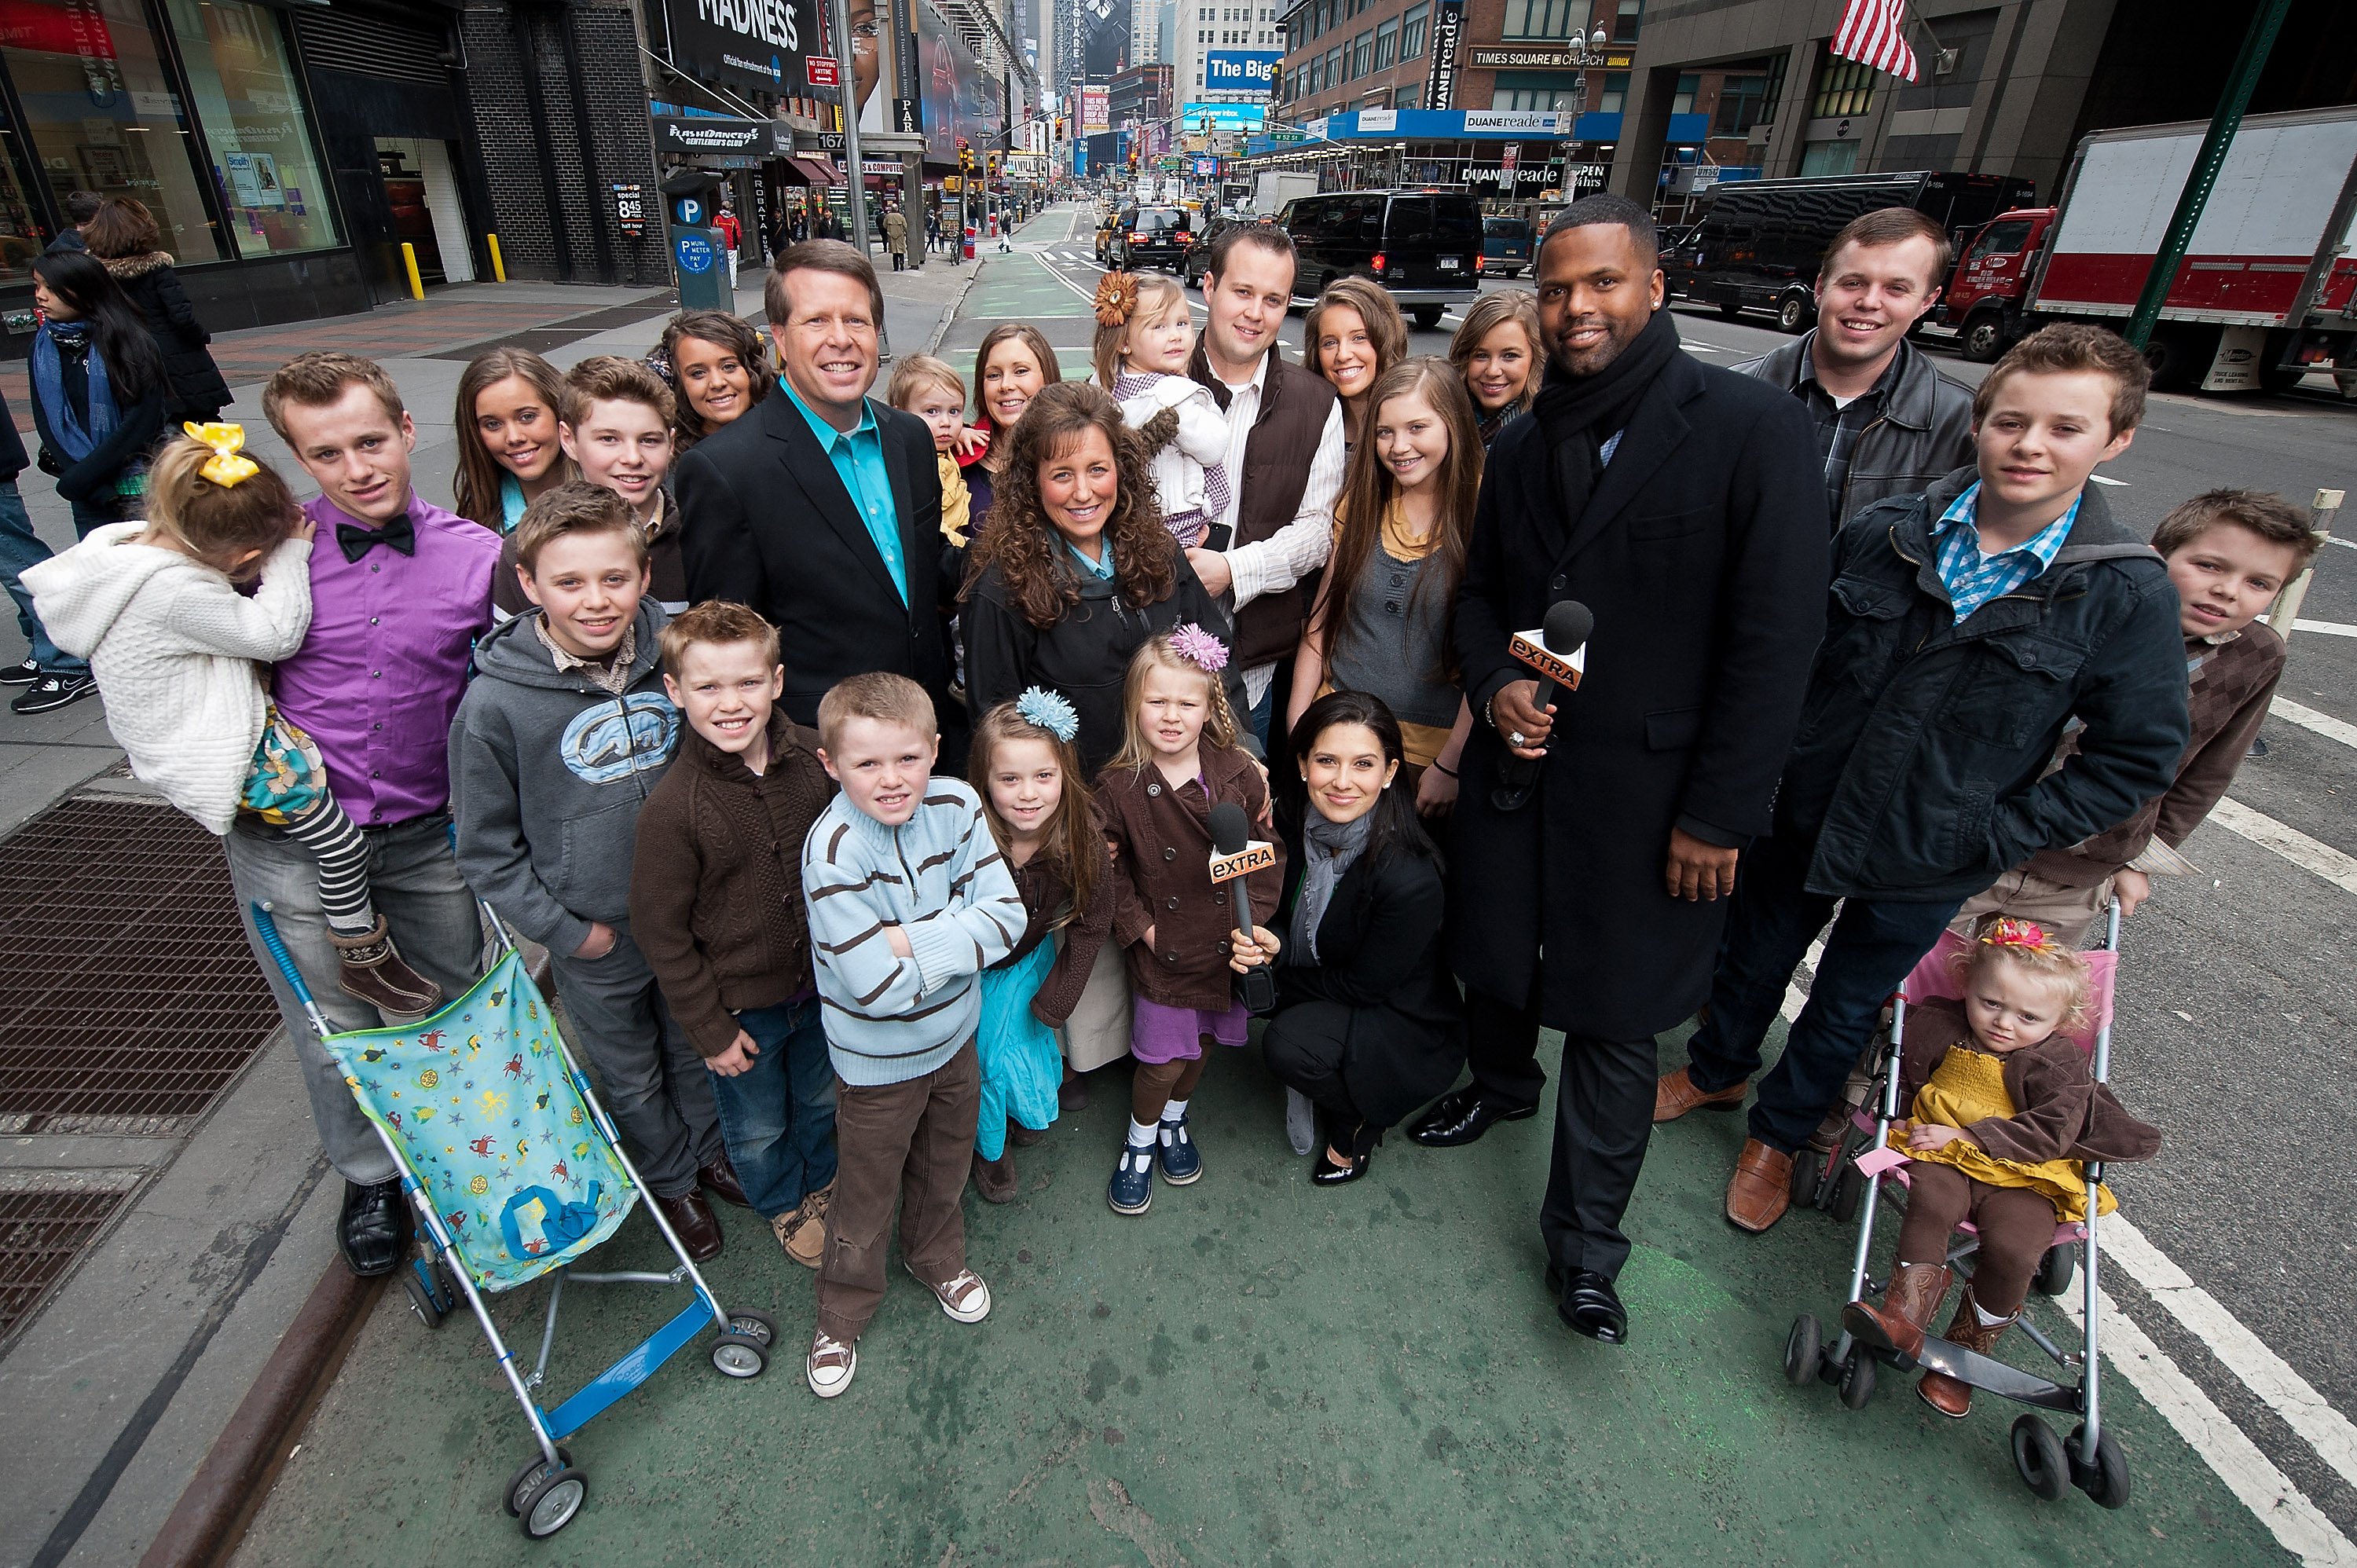 Jim Bob and Michelle Duggar with their sons and grandchildren during their 2013 visit to "Extra" show in New York City. | Photo: Getty Images